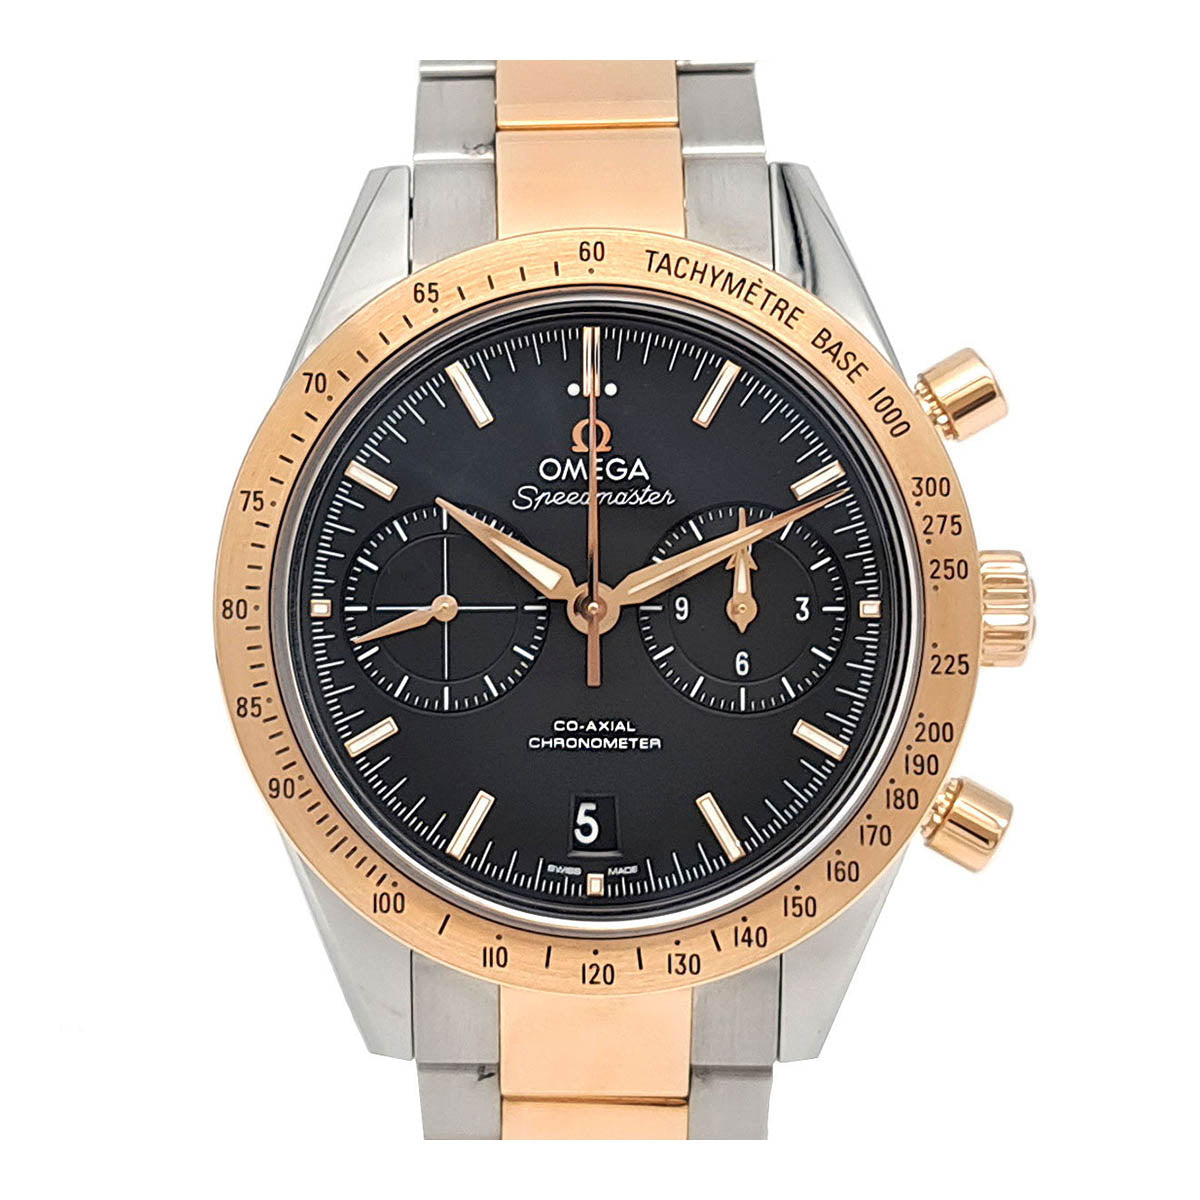 OMEGA Speedmaster '57 Co-Axial Chronograph Men's Watch in Stainless Steel & Pink Gold 331.20.42.51.01.002